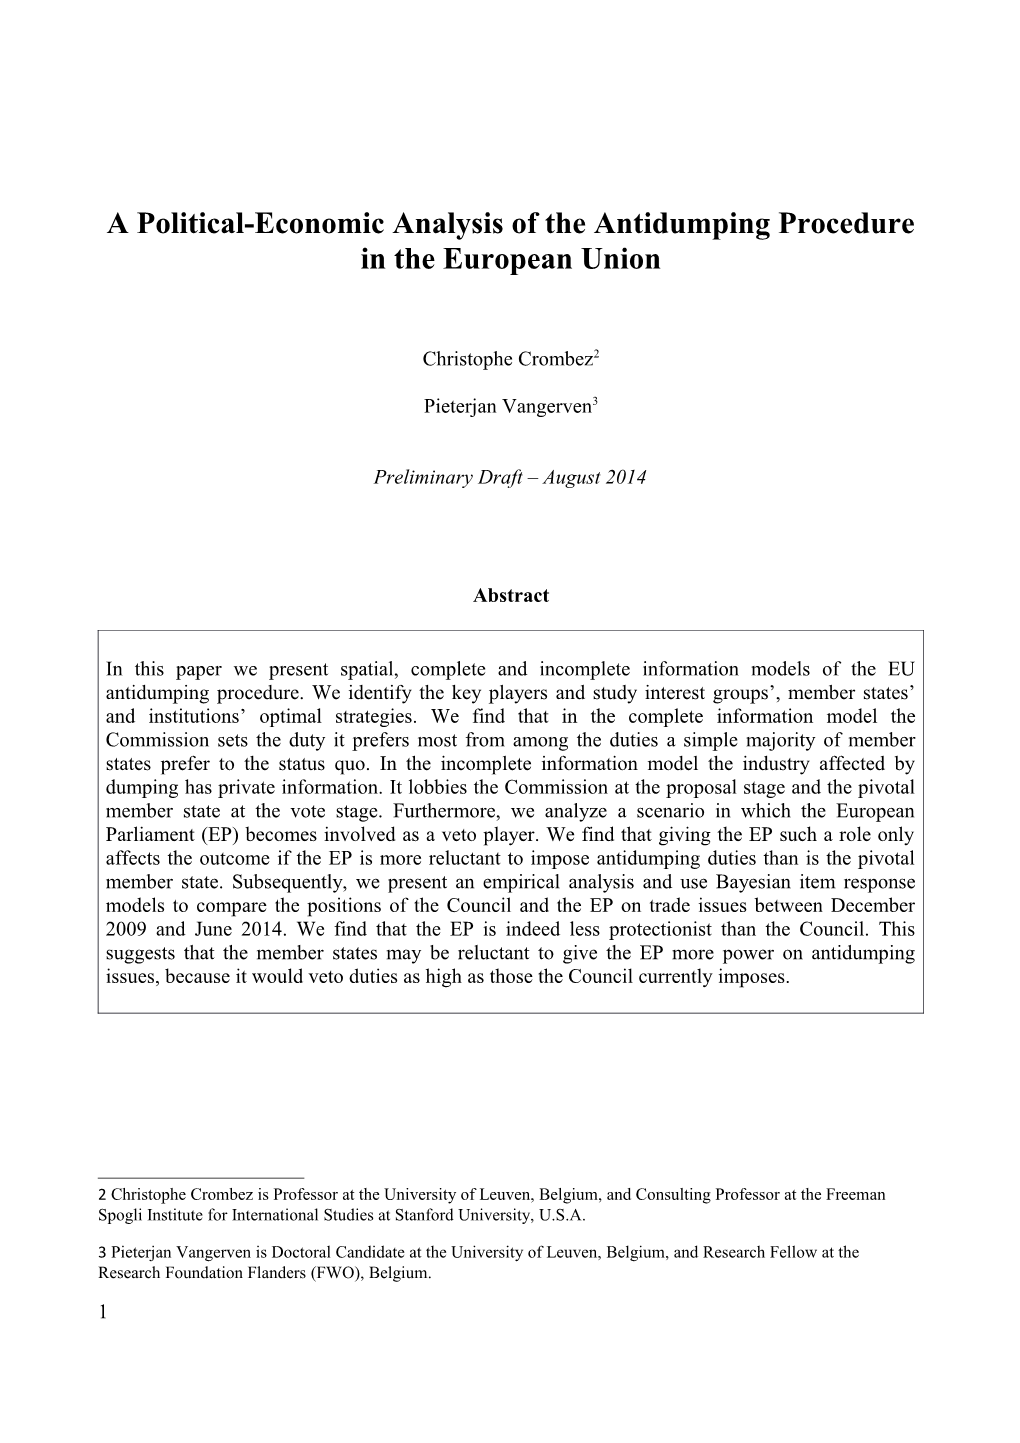 A Political-Economic Analysis of the Antidumping Procedure in the European Union